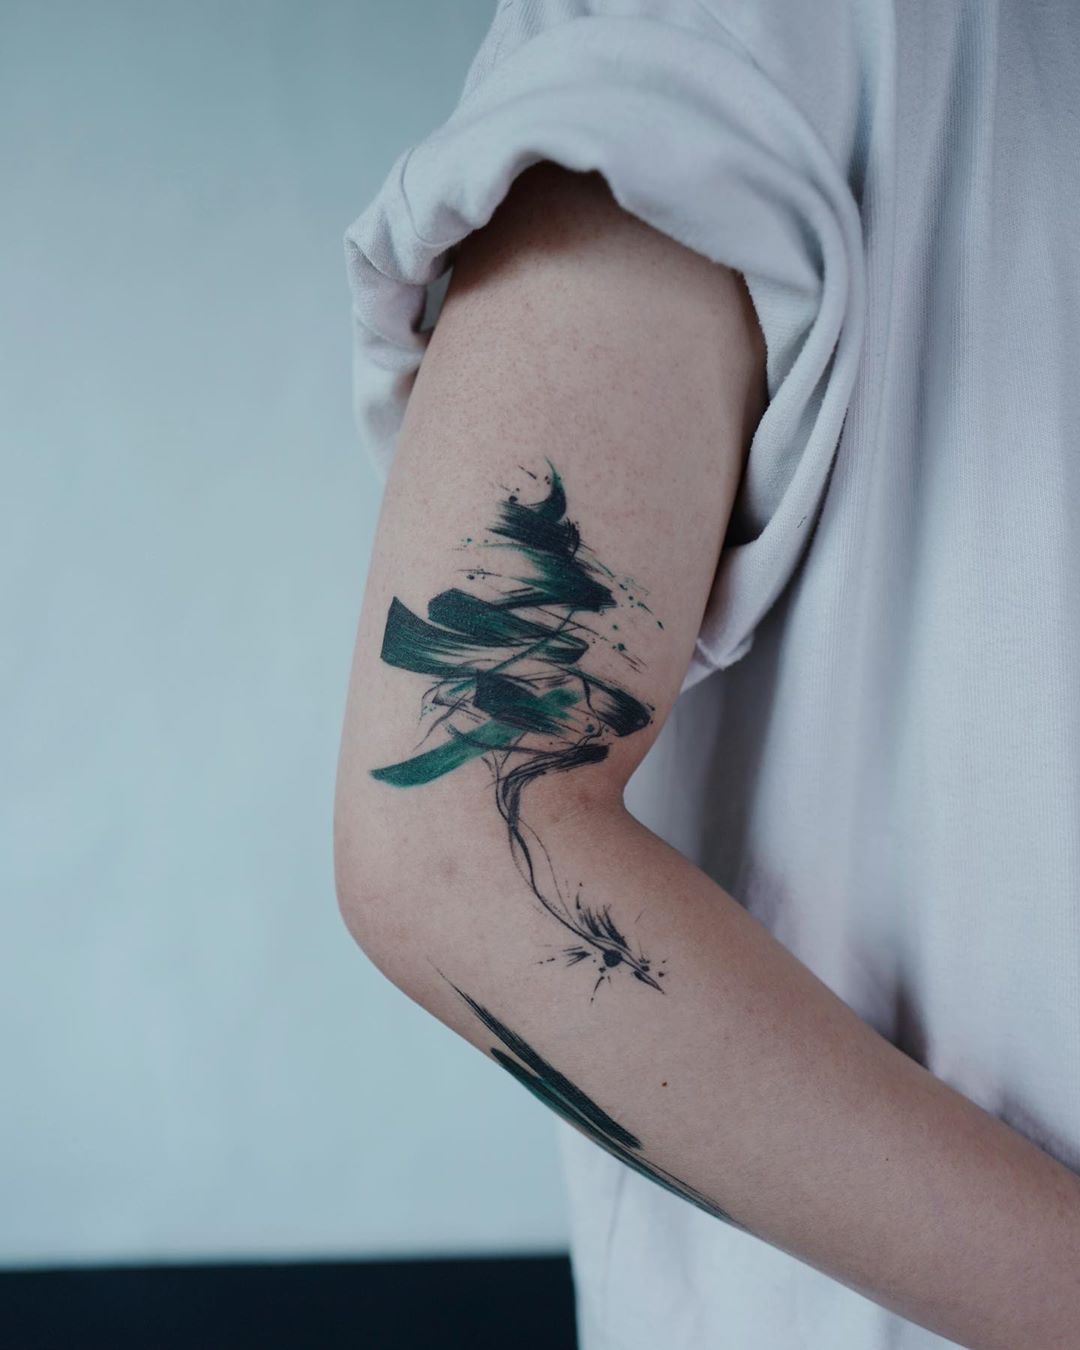 Abstract tree tattoo by Studio Bysol